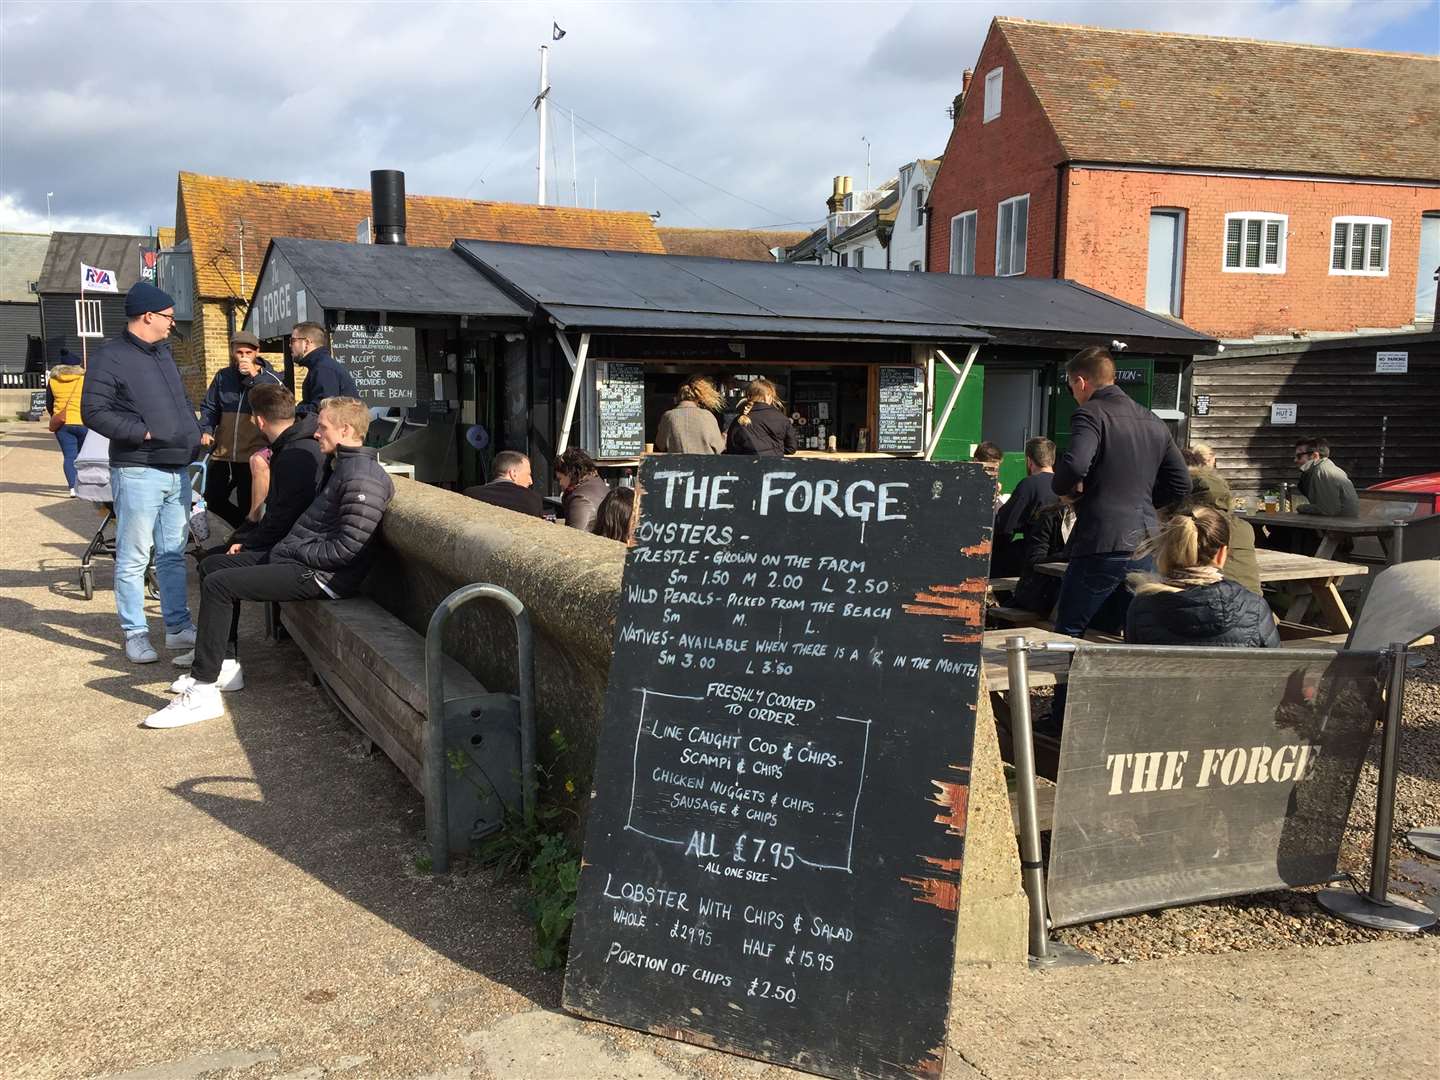 The Forge in Whitstable